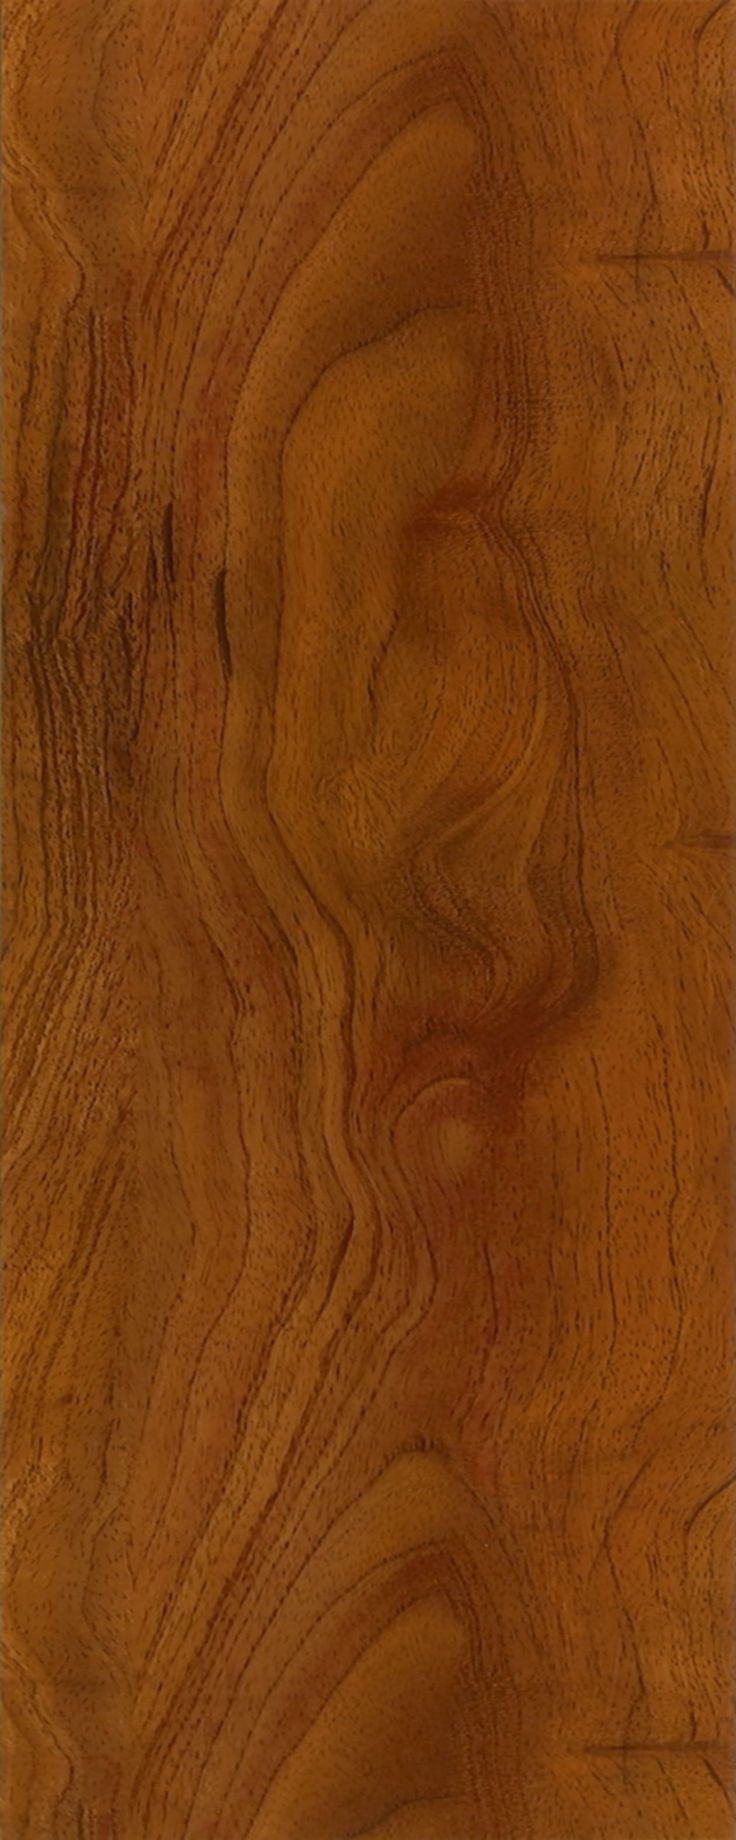 16 Stunning Armstrong Acacia Hardwood Flooring 2024 free download armstrong acacia hardwood flooring of 26 best floors images on pinterest flooring floors and vinyl tiles inside learn more about armstrong exotic fruitwood persimmon and order a sample or fi